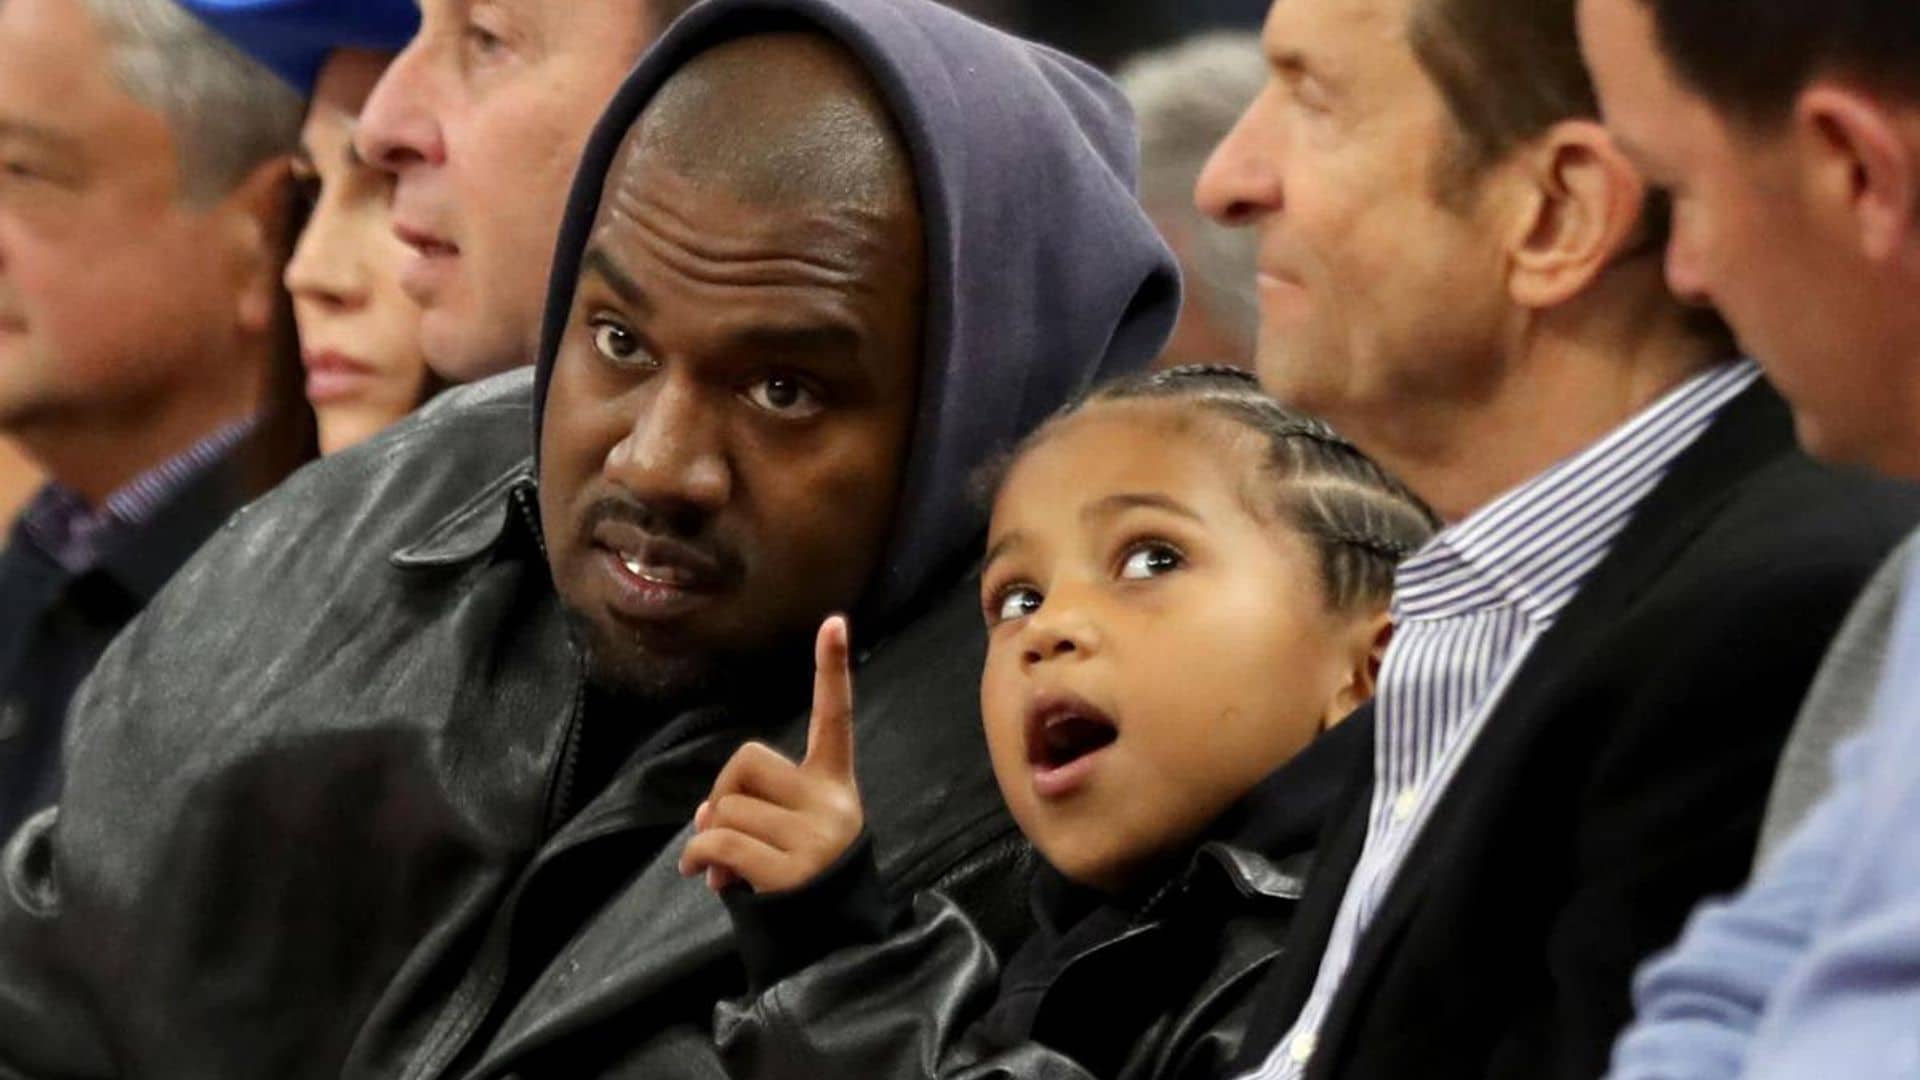 Kanye West takes son Saint to Warriors game amid his claims Kim K is keeping him from kids